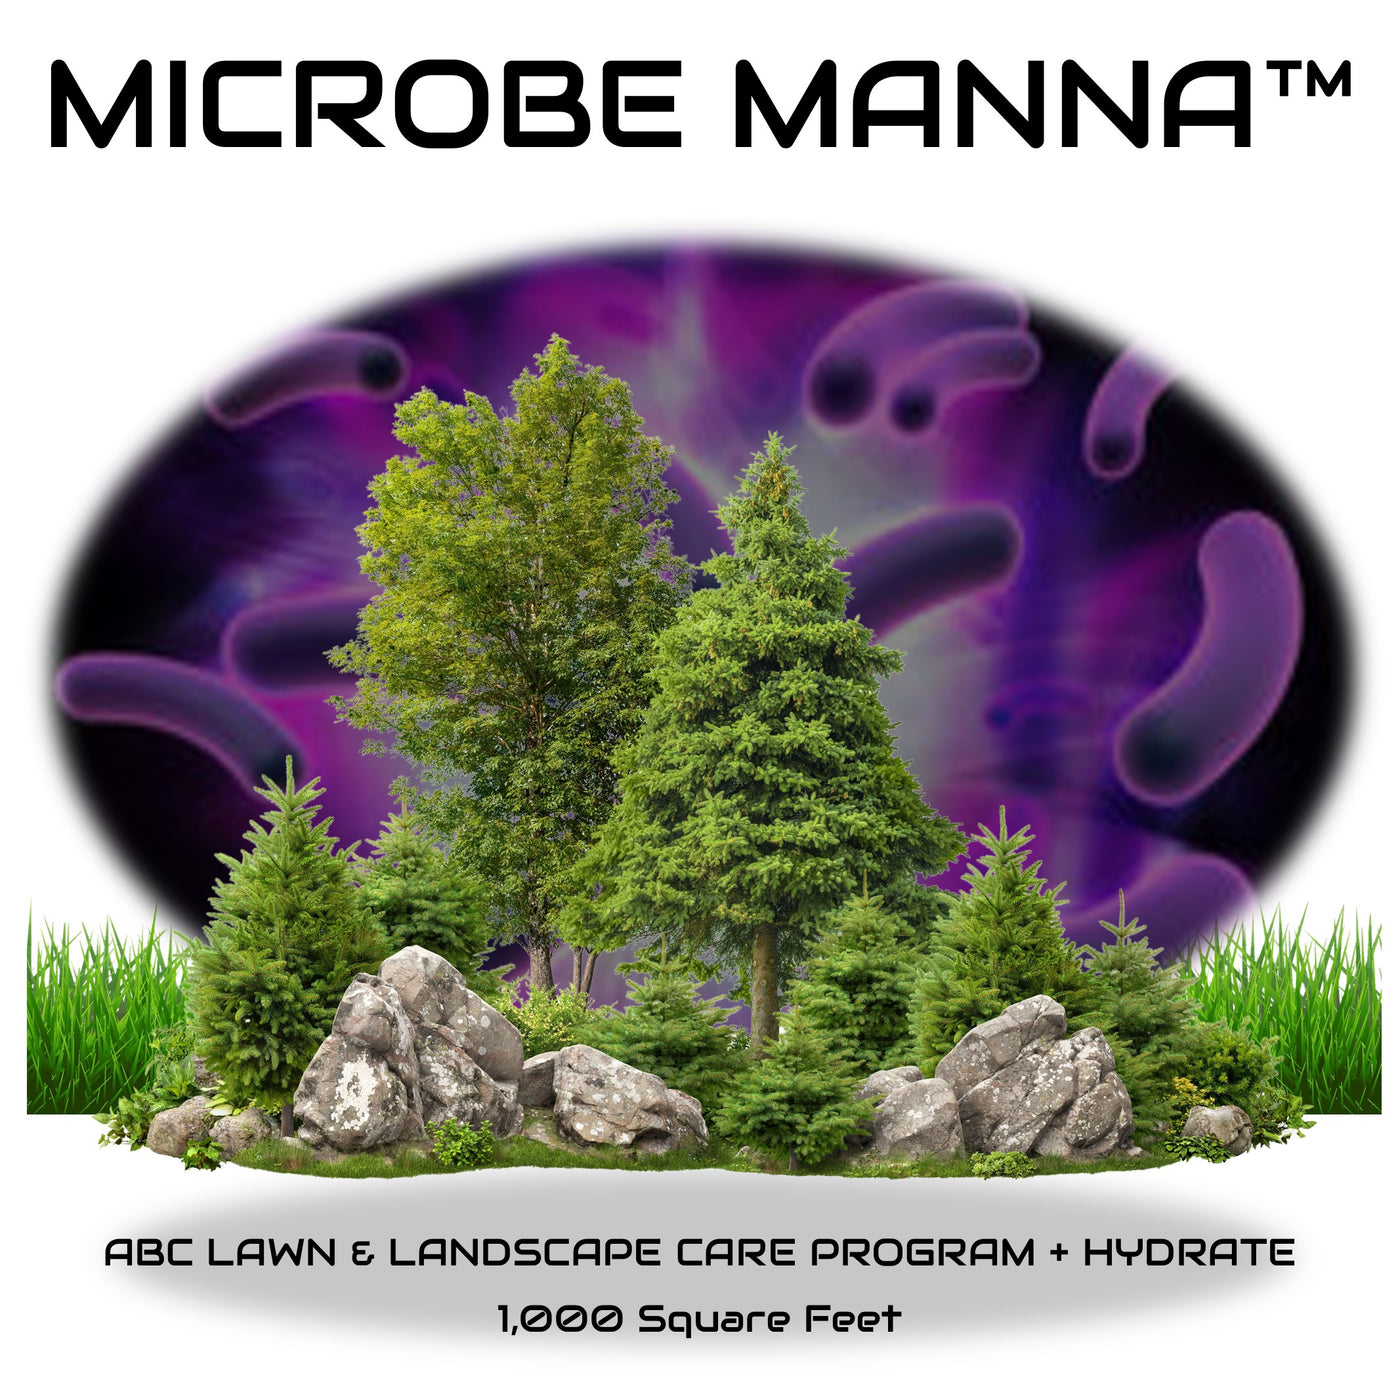 Microbe Manna ABC Lawn and Landscape Care Program and Hydrate for 1000 Square Feet